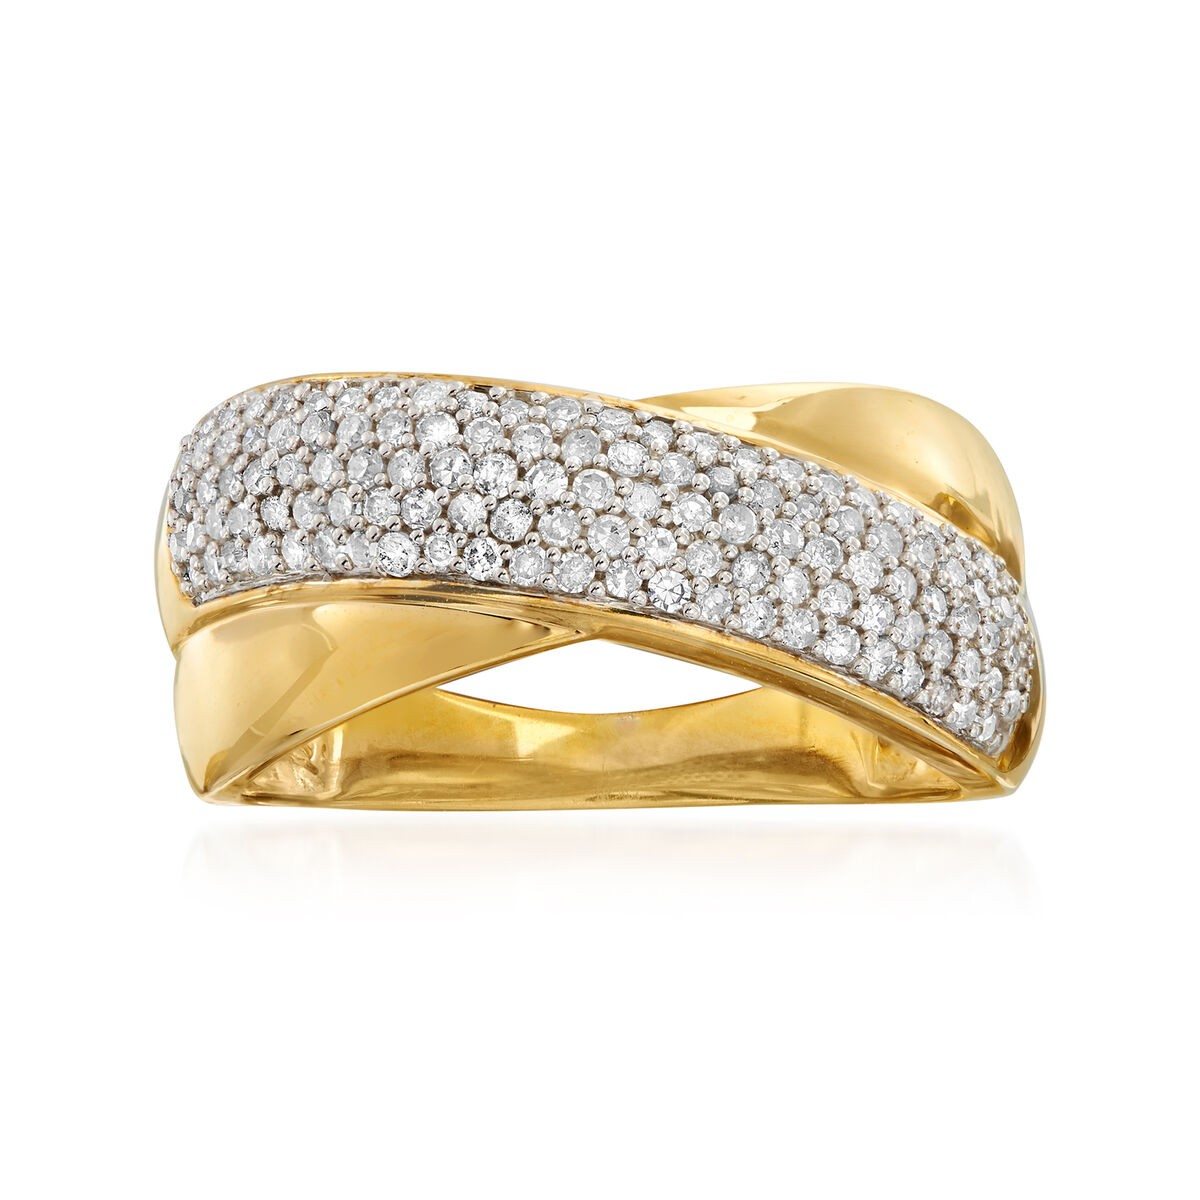 .50 ct. t.w. Pave Diamond Crisscross Ring in 18kt Gold Over Sterling. Size 6